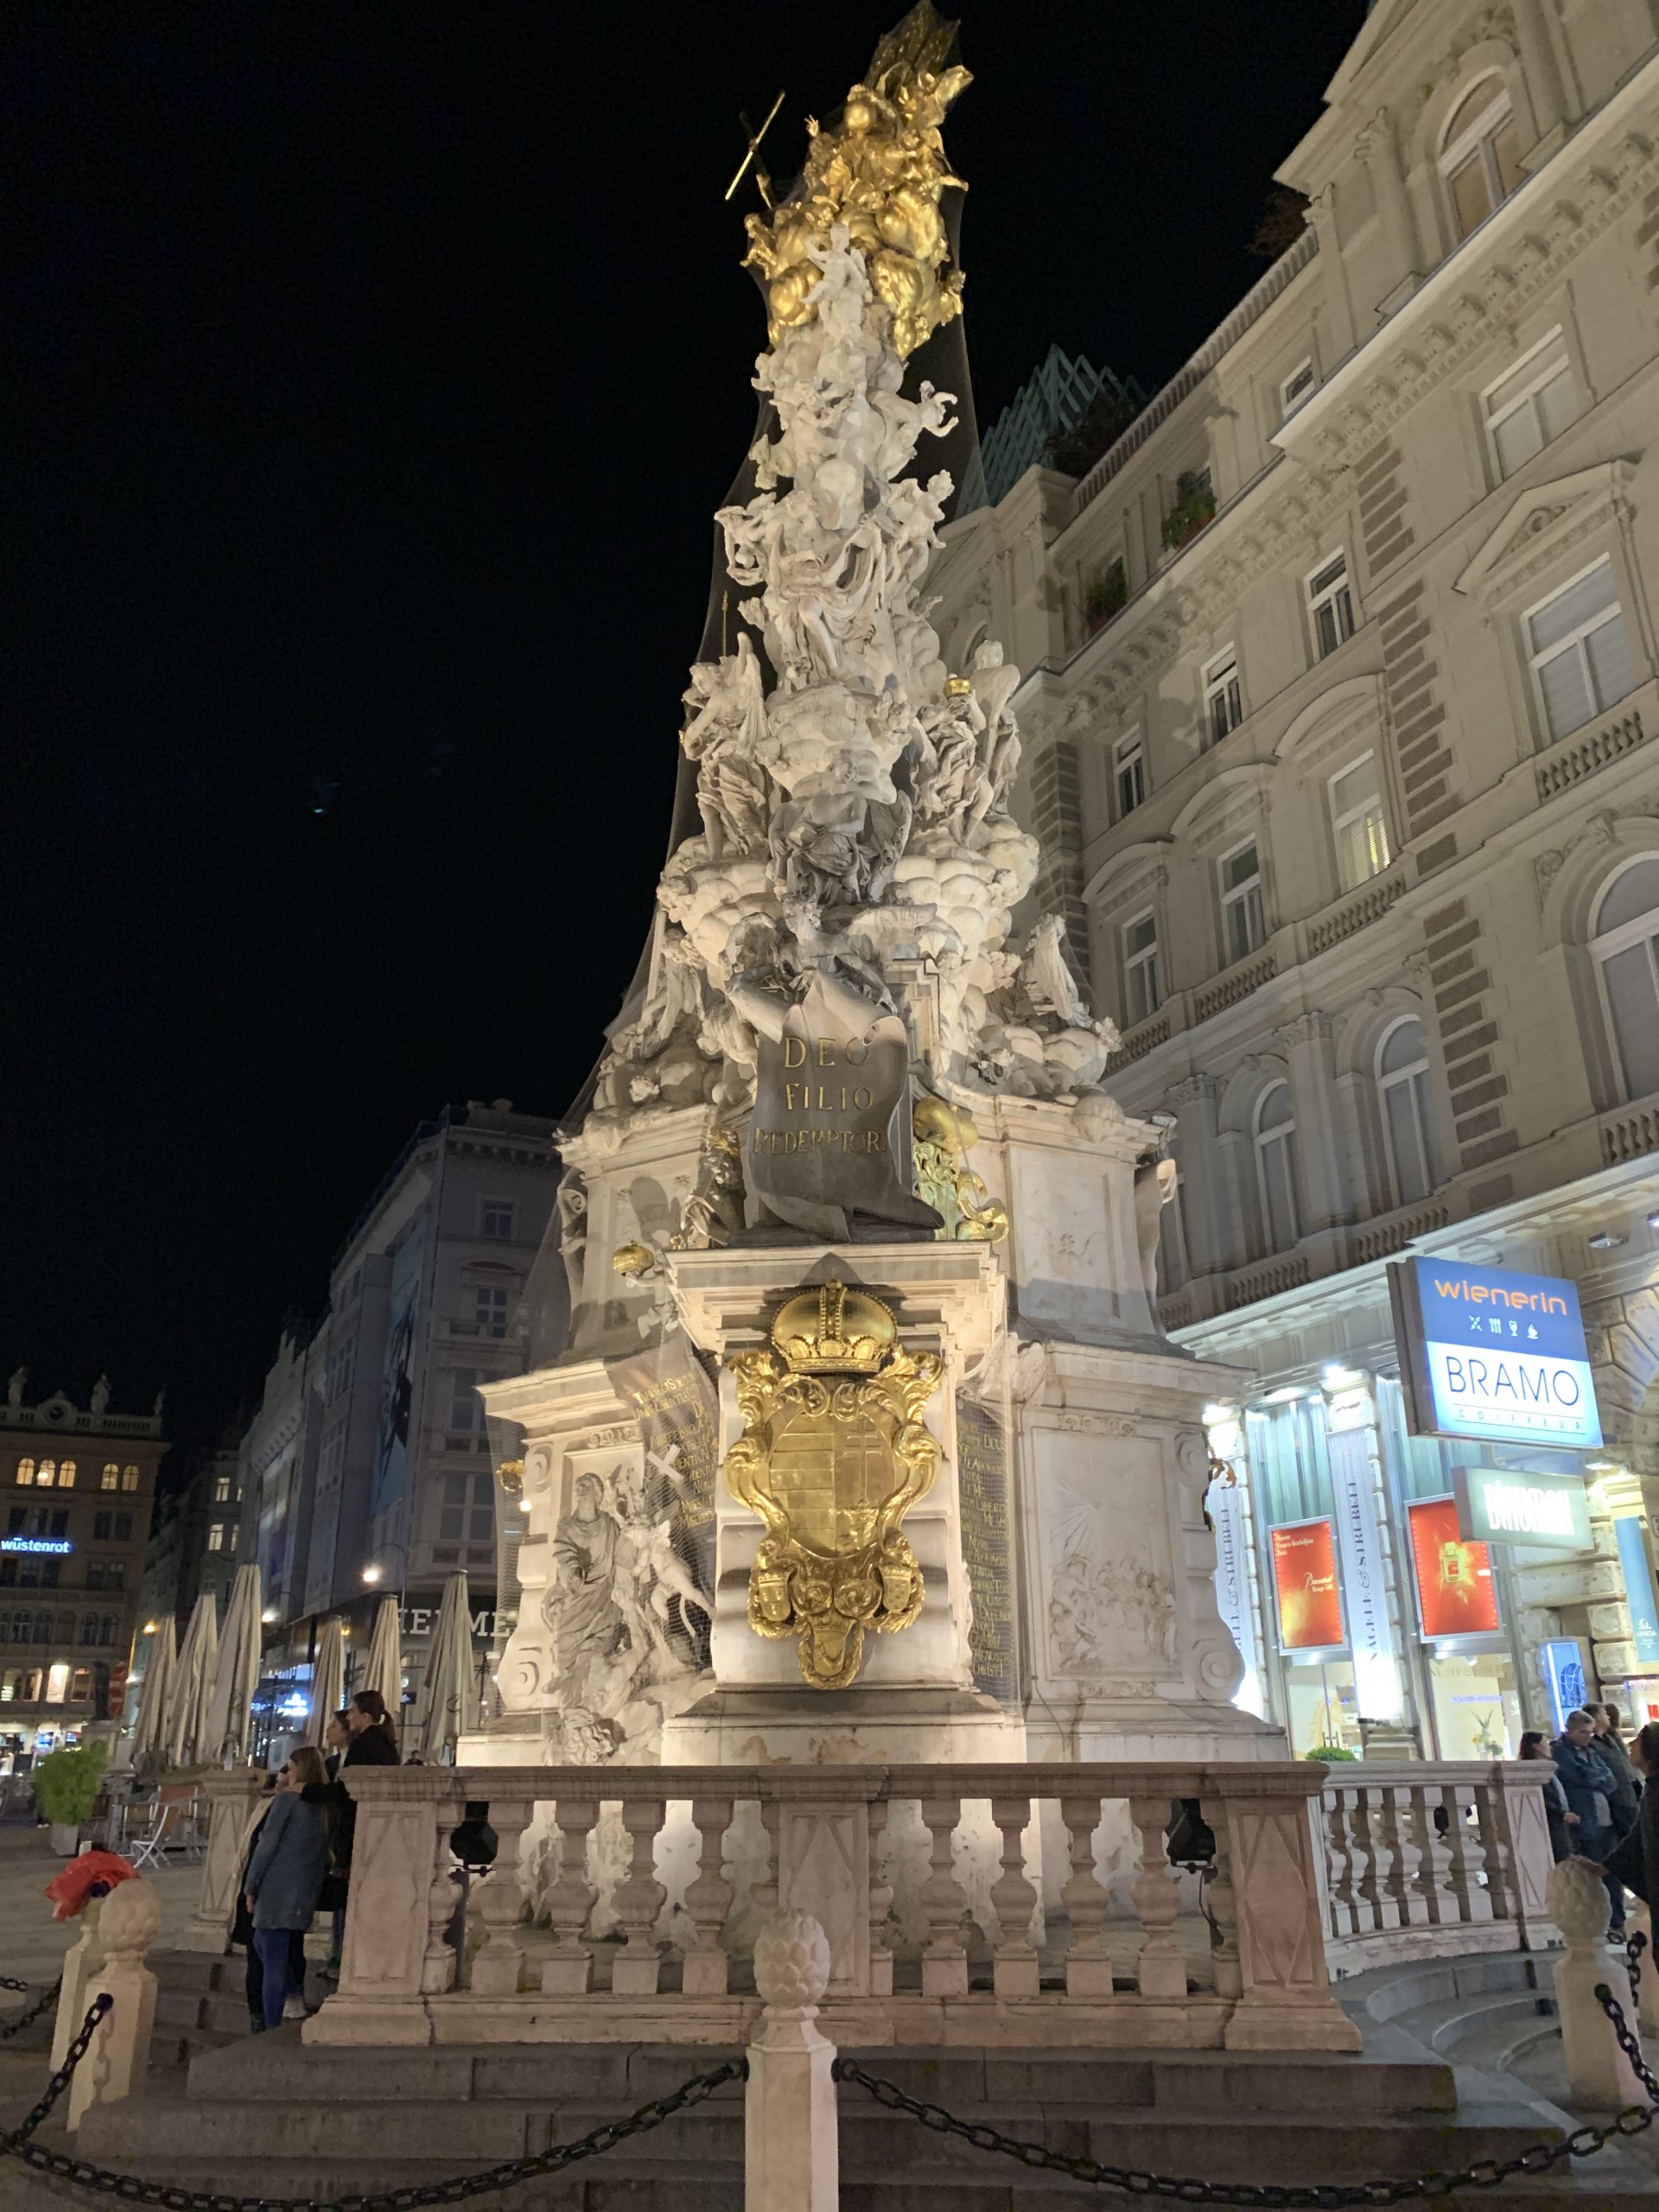 beautifully ornate fountain in Vienna lit up at night